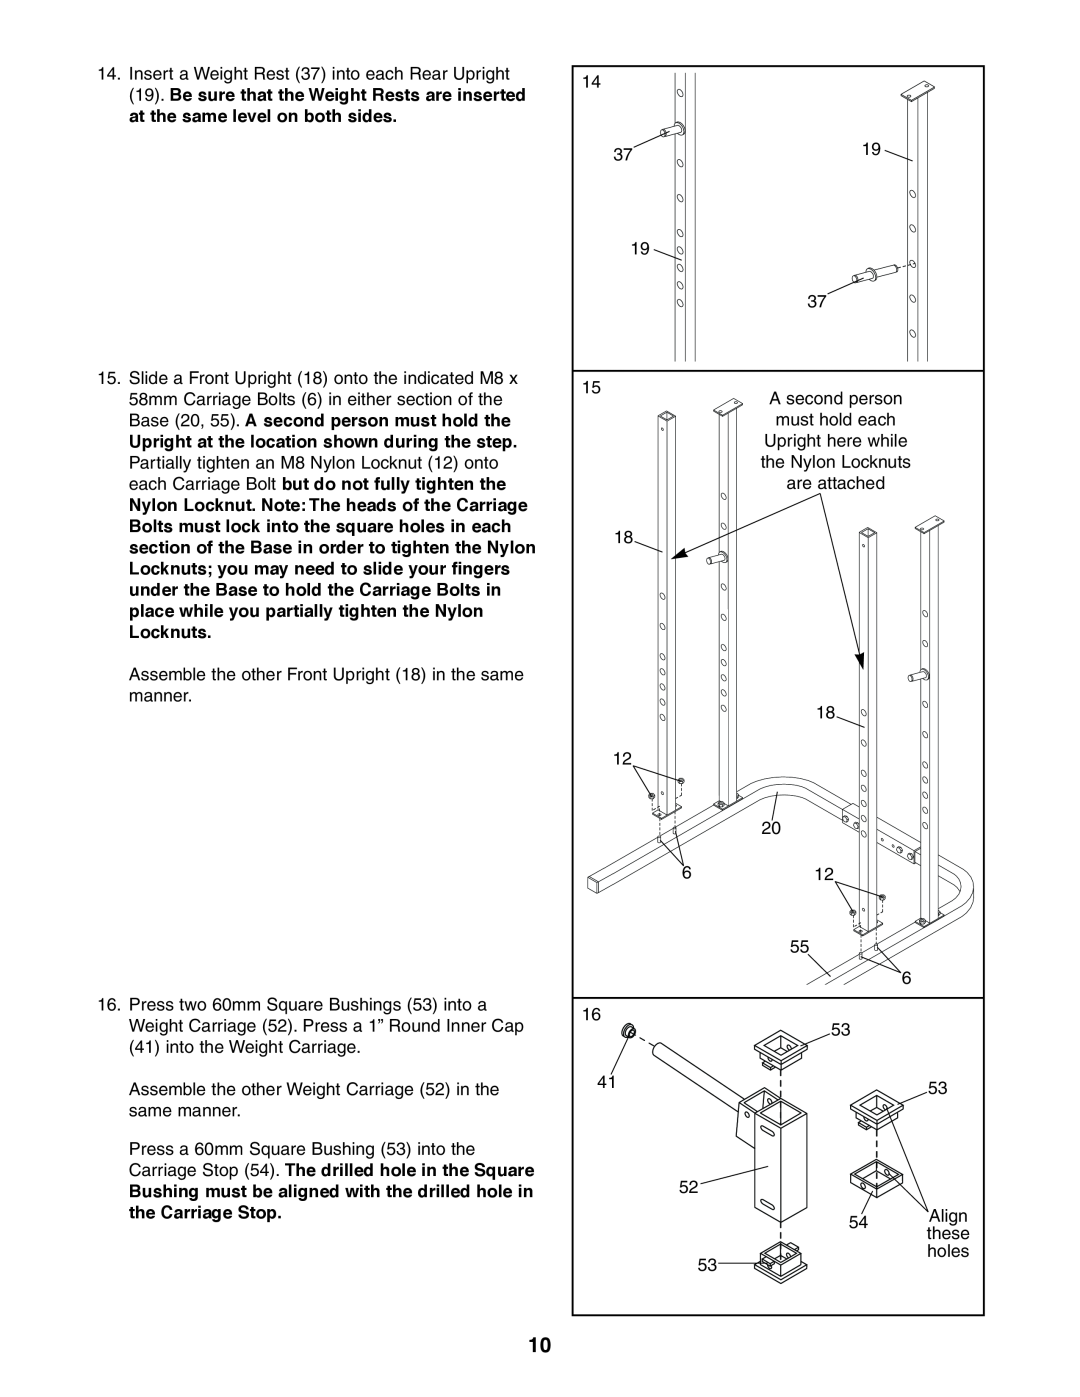 Weider 831.150470 user manual Upright at the location shown during the step 